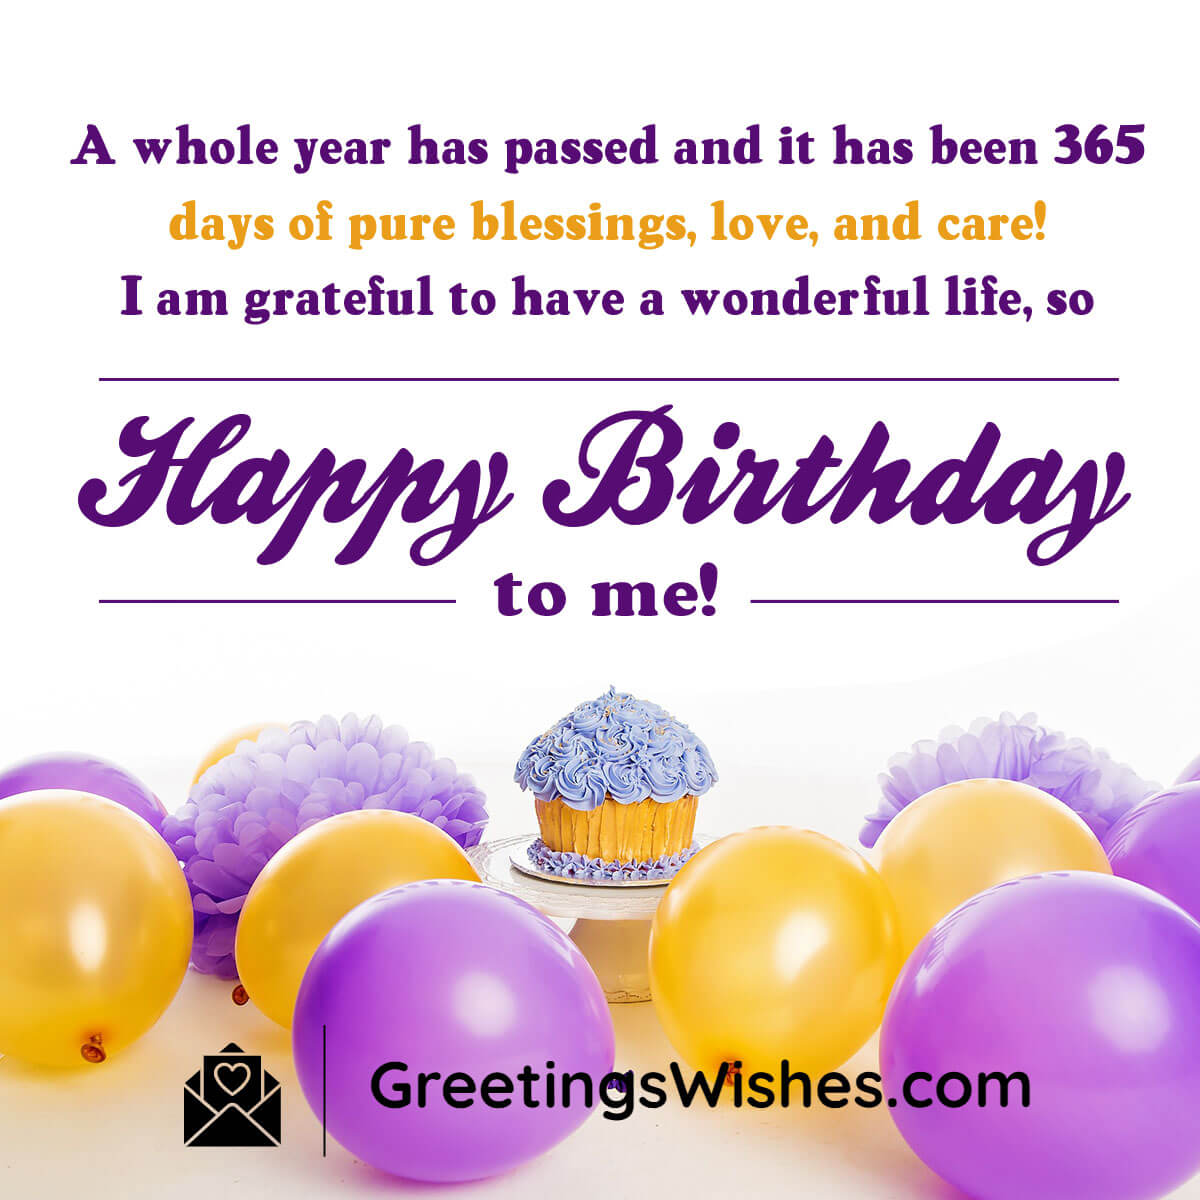 Birthday Wishes For Myself - Greetings Wishes